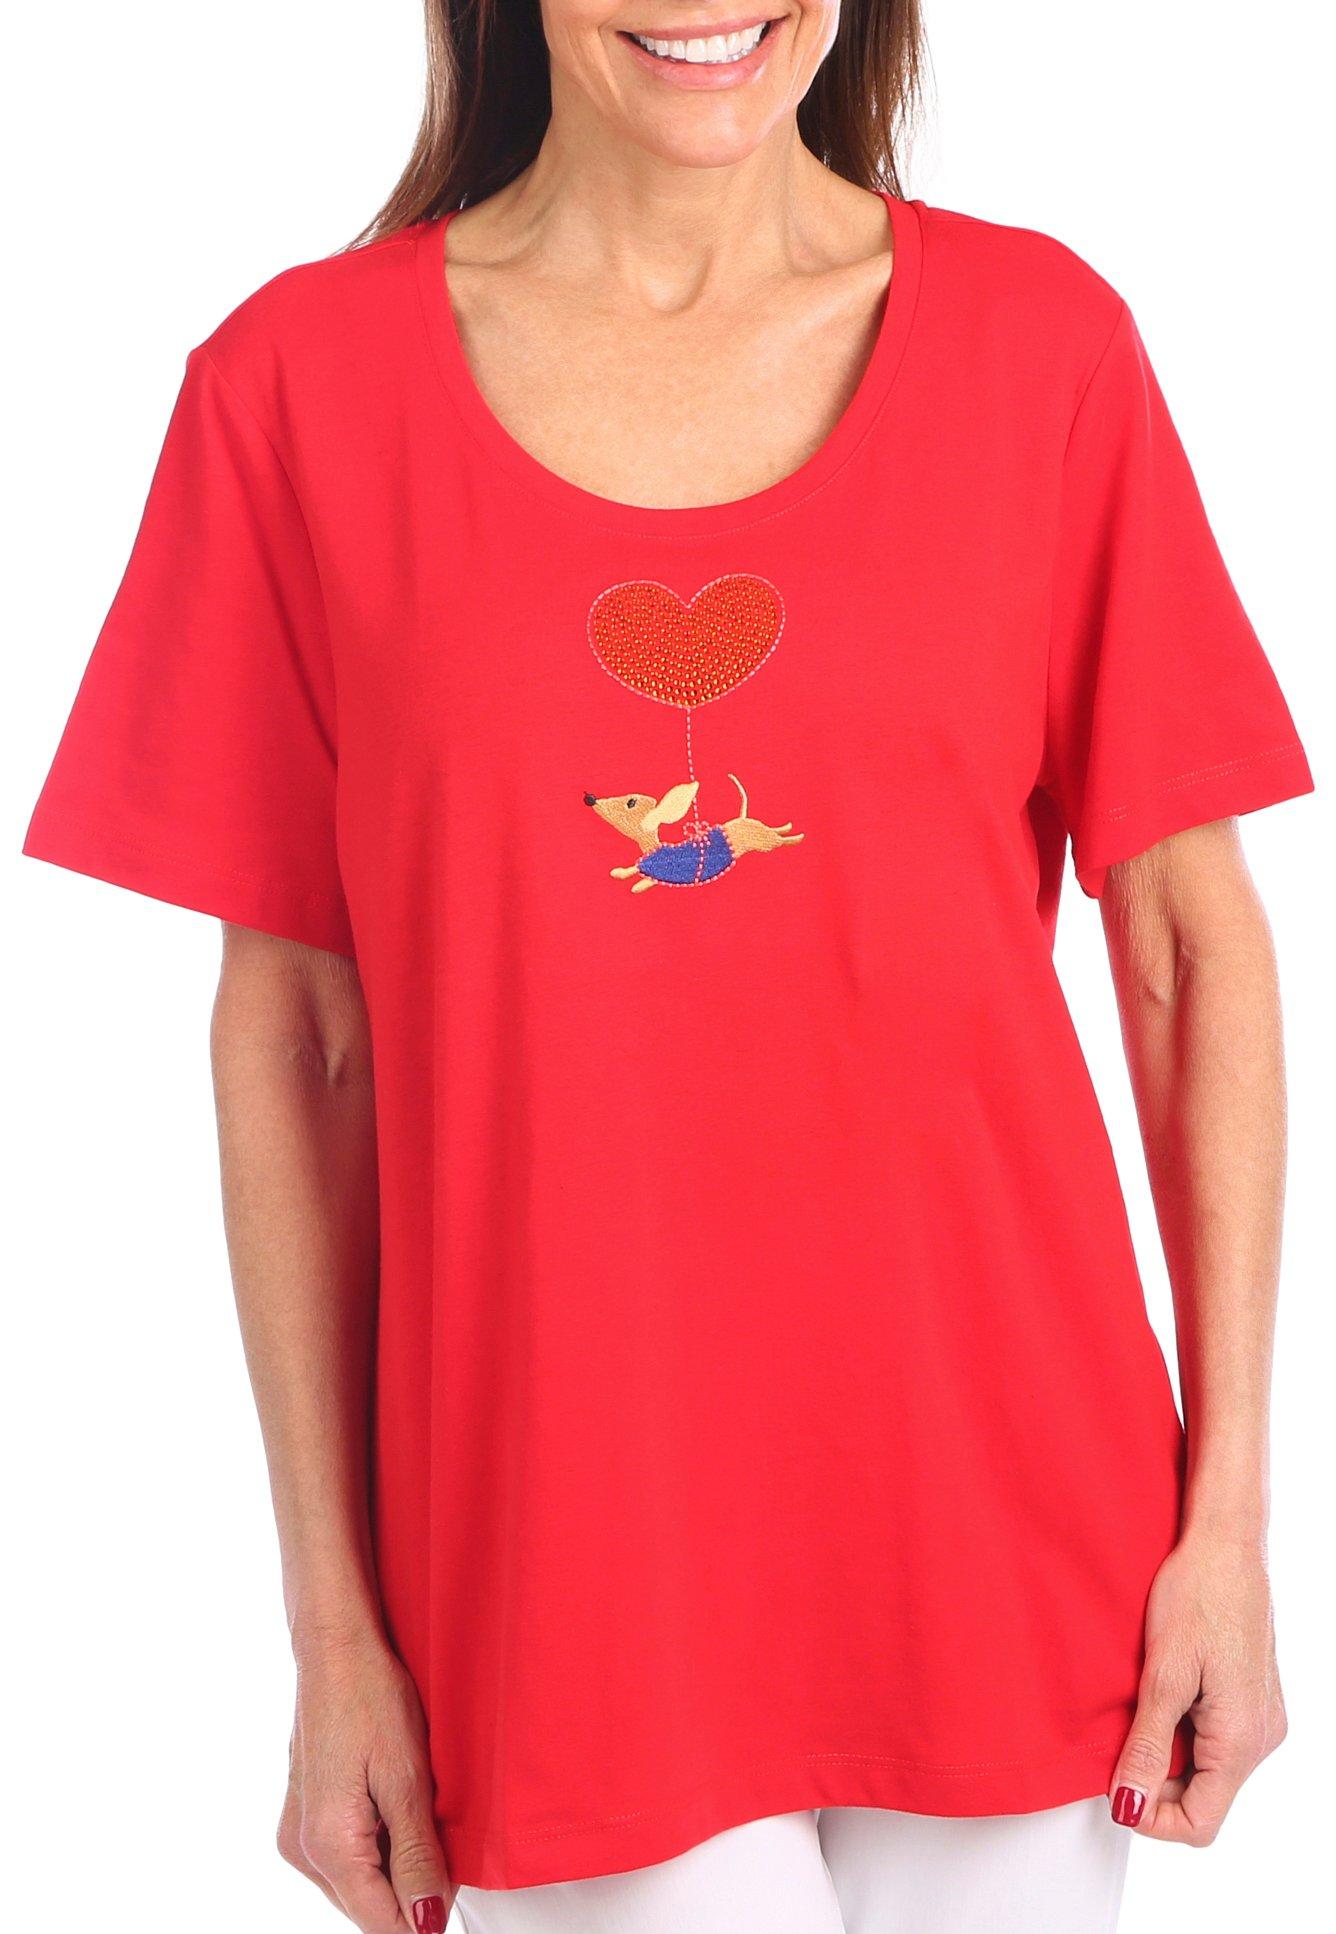 Coral Bay Petite Jewelled Heart & Dog Short Sleeve Top